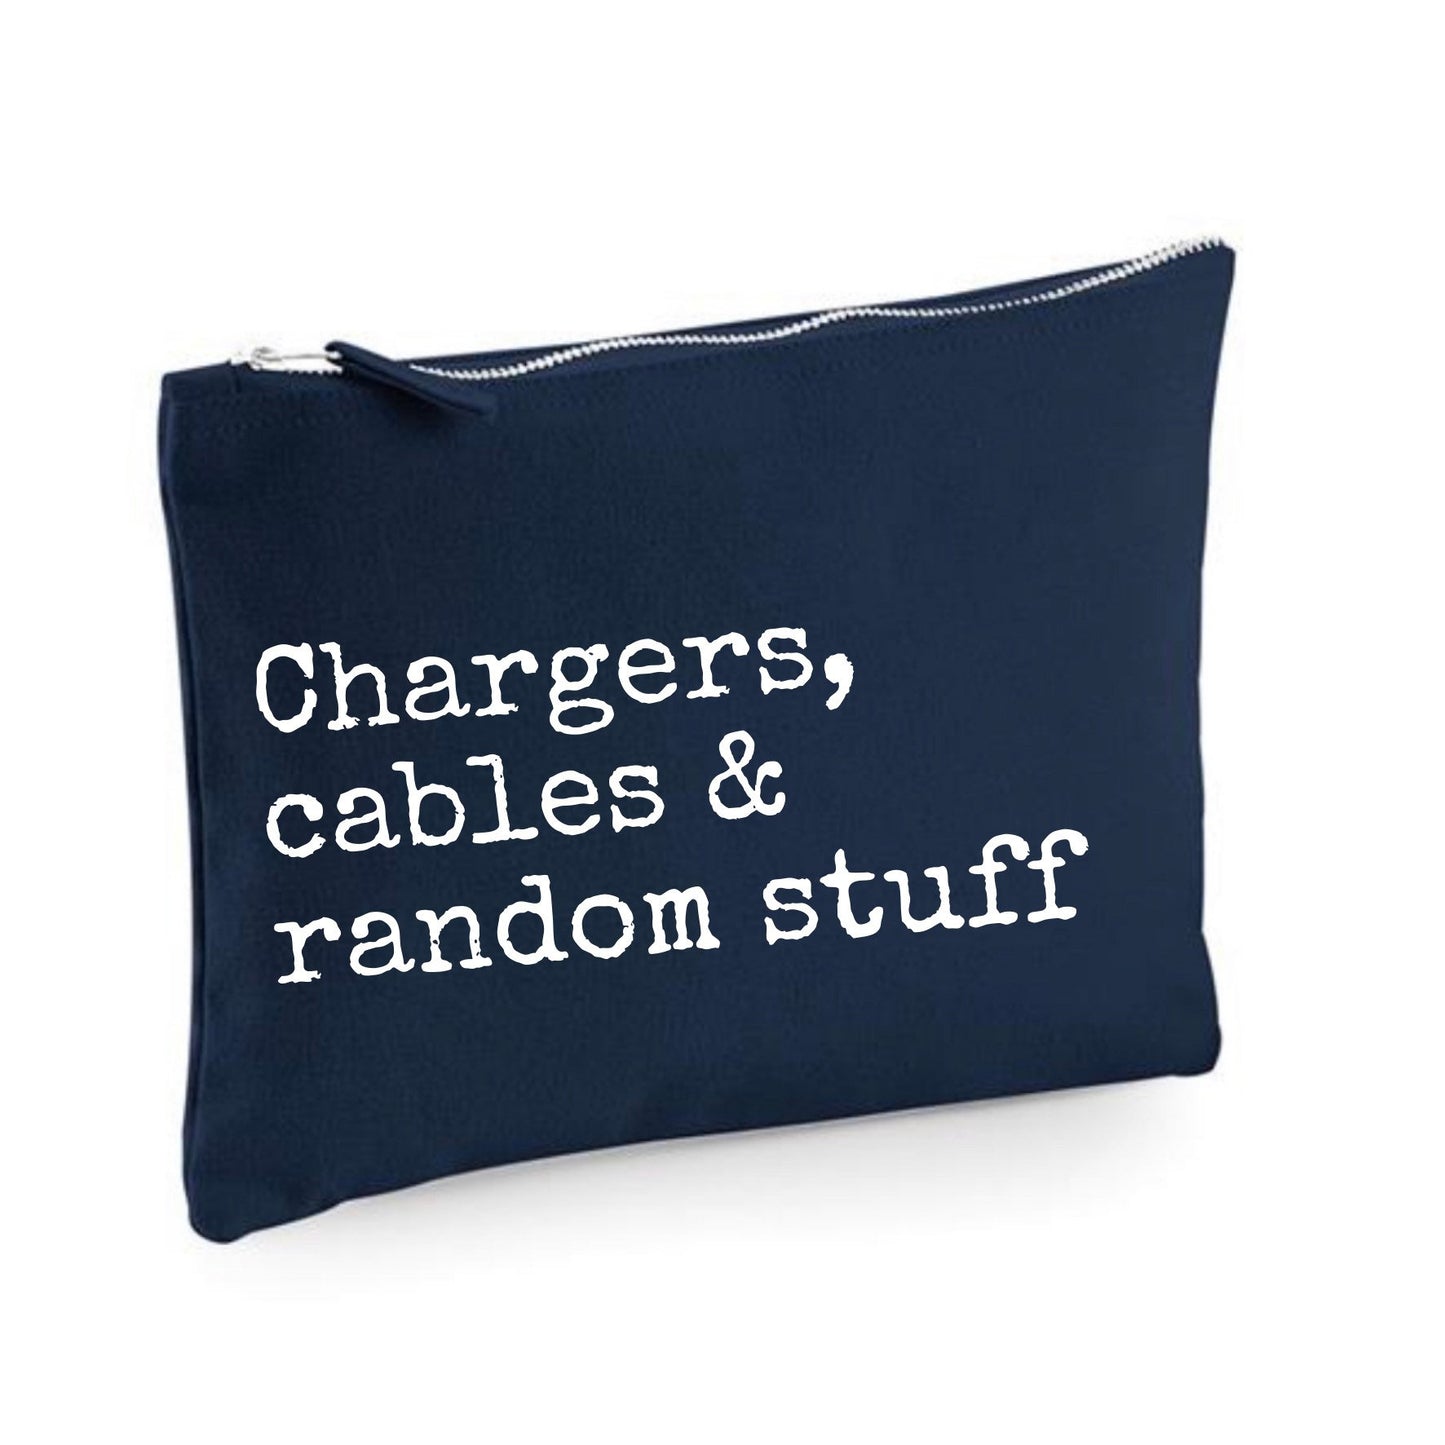 Chargers and cables bag, pouch for cables and random stuff, christmas gift, stocking filler, secret Santa present, organised mum gift